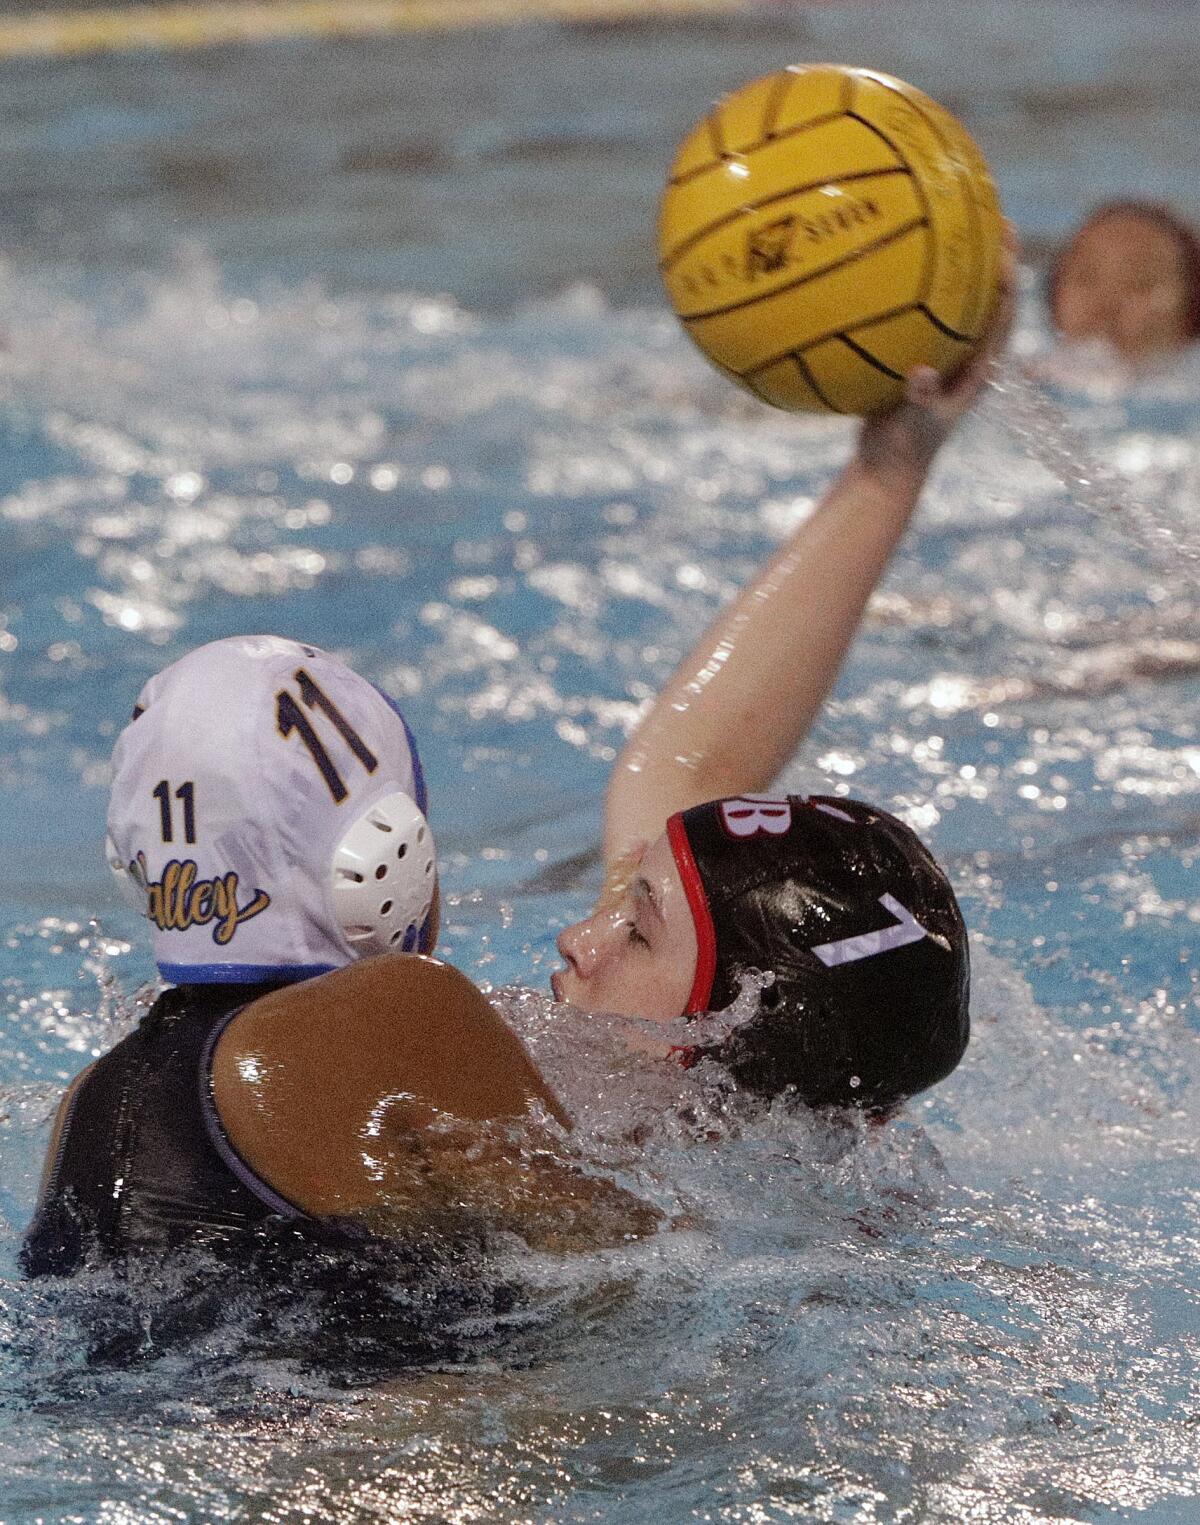 Burroughs' Nancy Baylor, begin defended by Santa Ana's Guadalupe Ayala, leans back to shoot in the first round of the CIF Southern Section Division V girls' water polo playoffs at Burroughs High School on Tuesday, February 11, 2020. Burroughs won the game and advances.